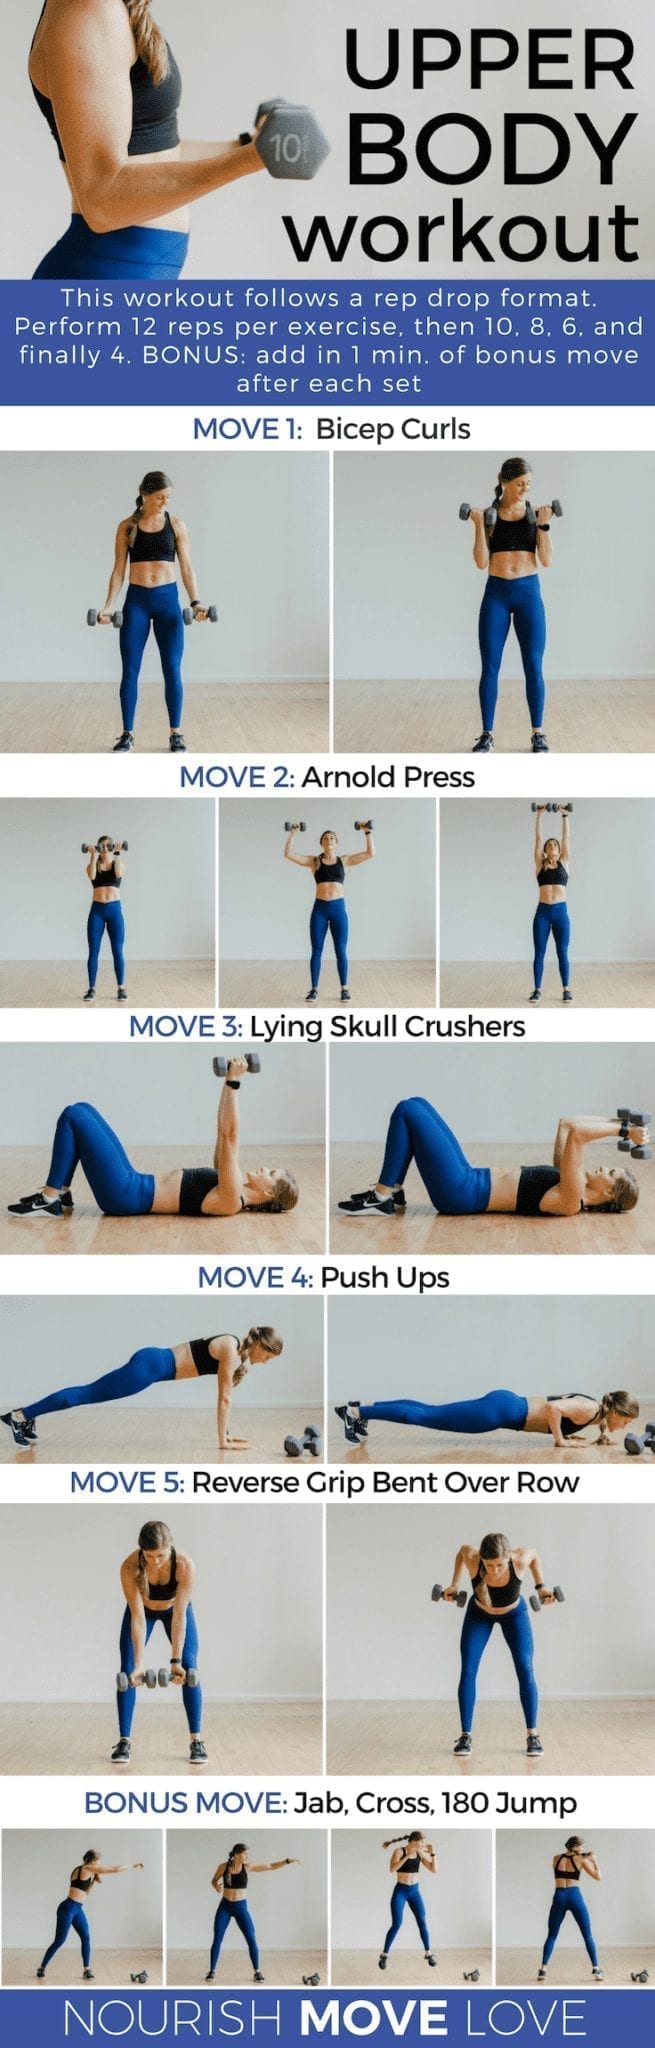 Best Upper Body Exercises For Women Arm Workout Toned Arms Nourish Move Love